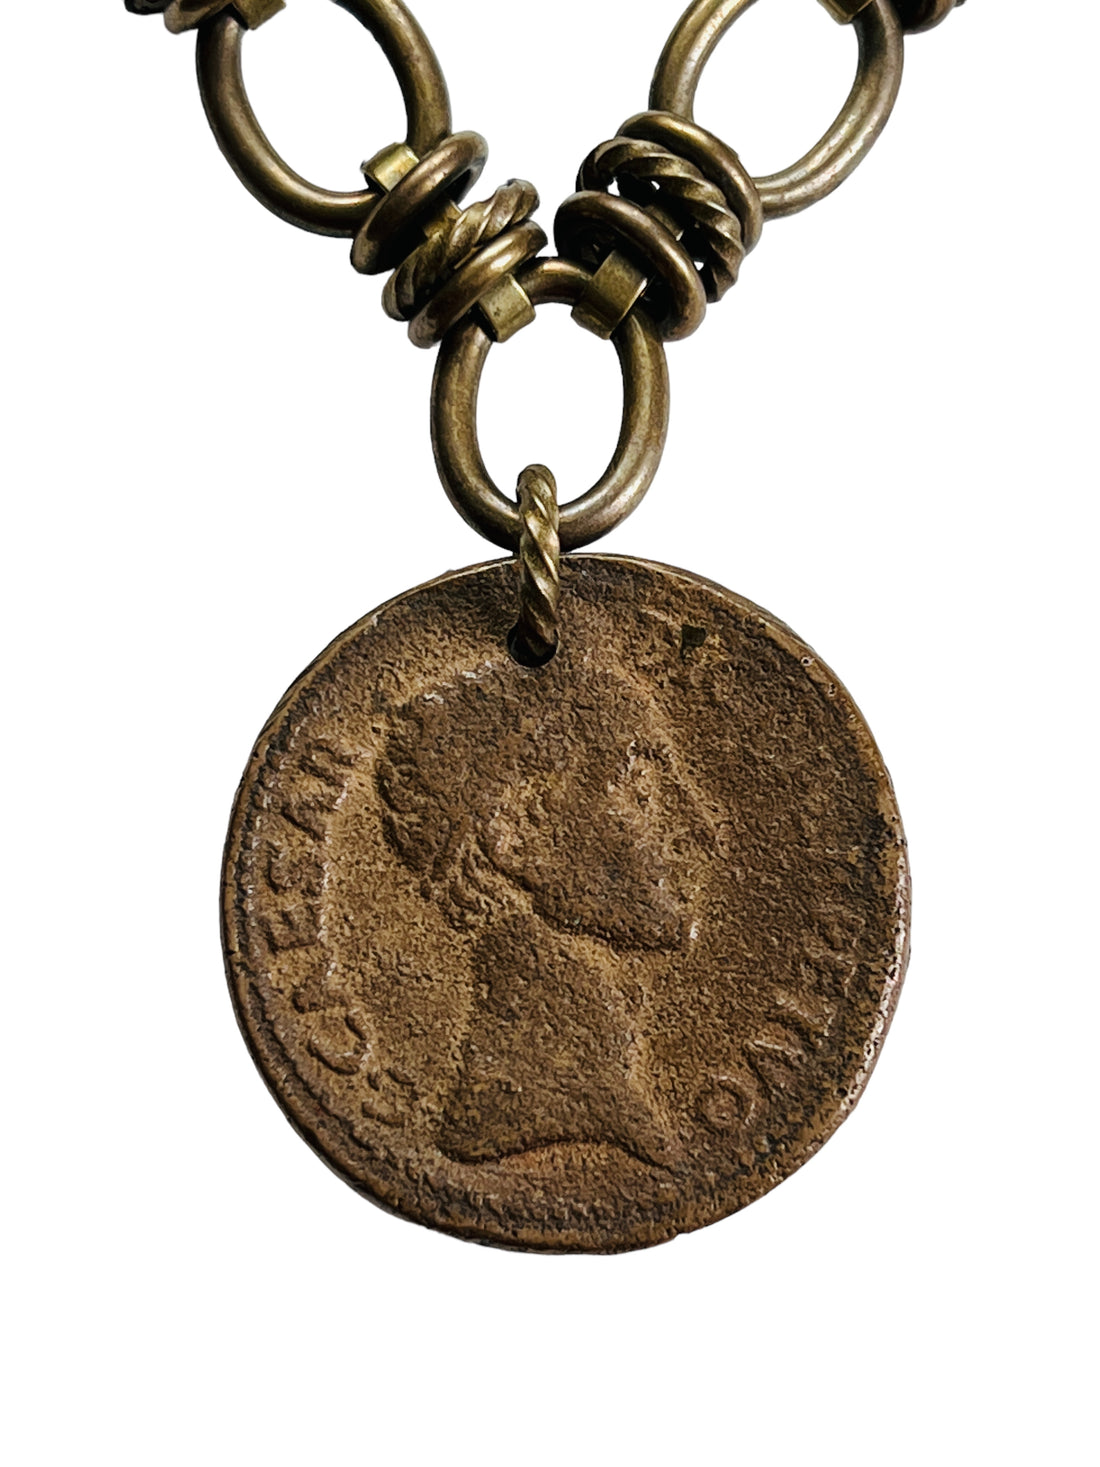 Antique Coin Necklace featuring side profile of Caesar